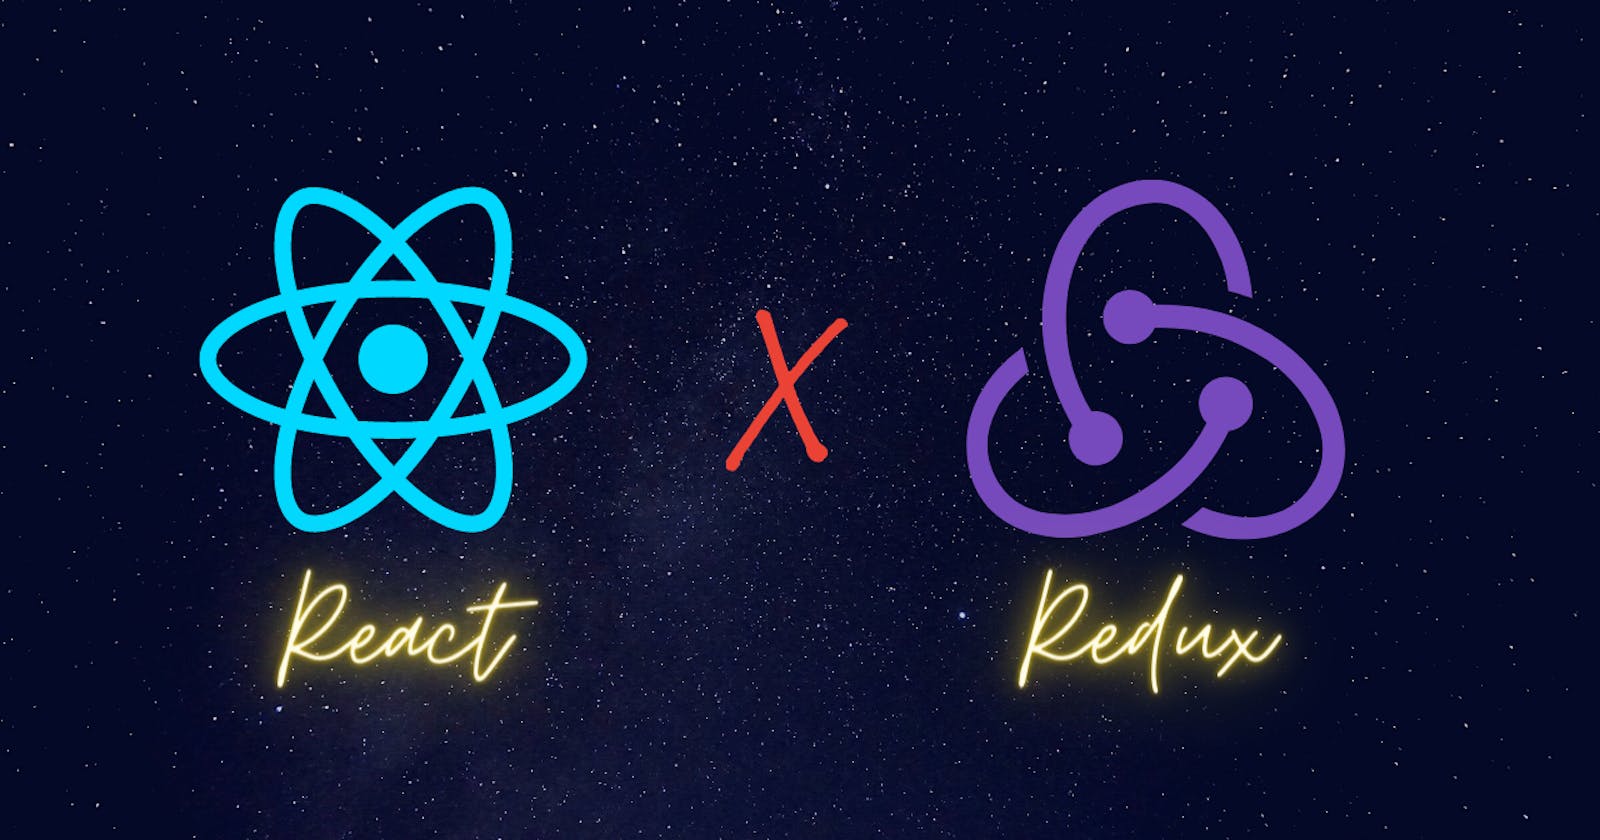 How to setup Redux with React